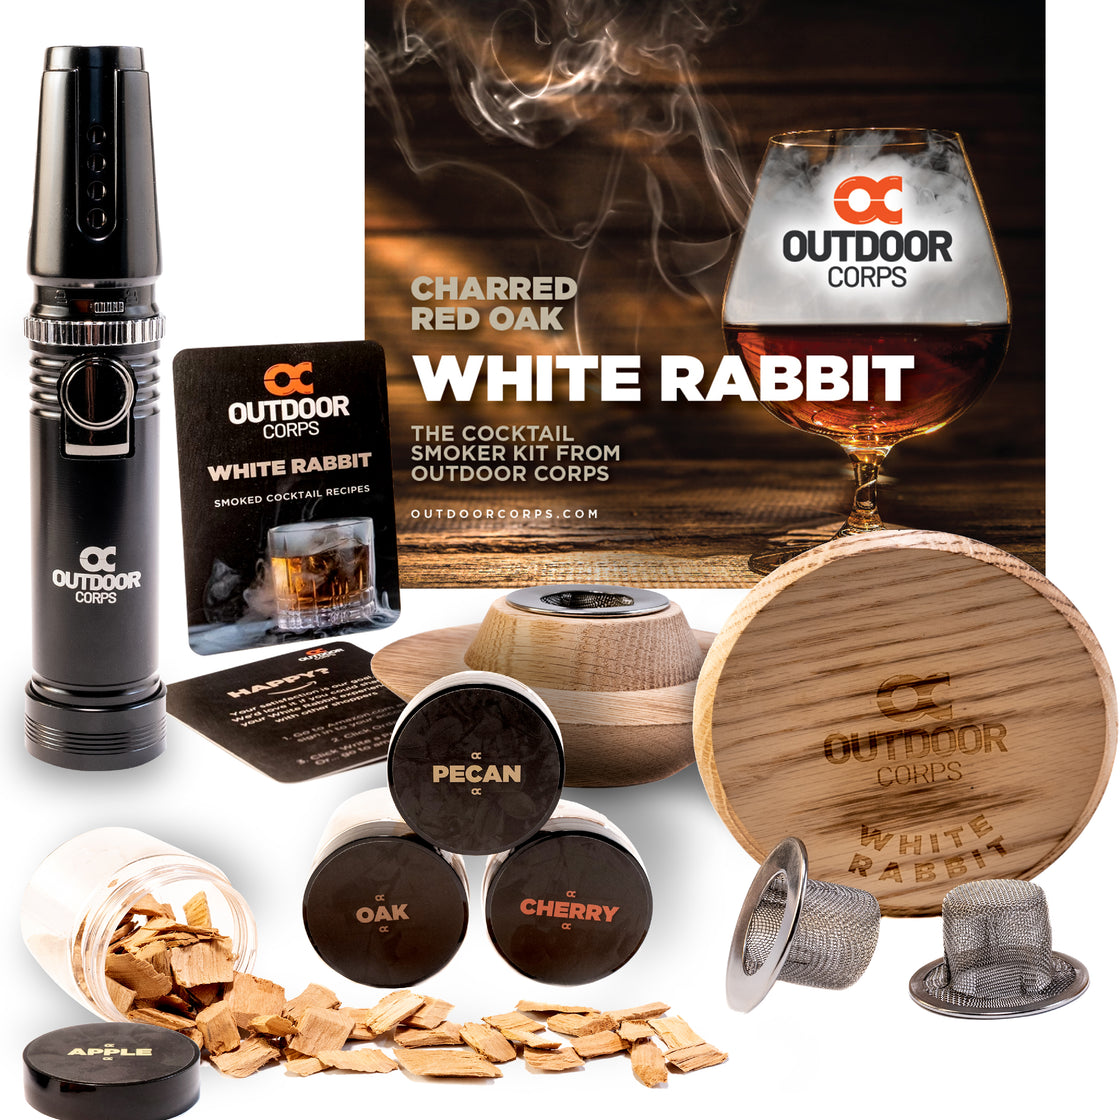 OUTDOOR CORPS White Rabbit Cocktail Smoker Kit With Premium Outdoor Tactical Torch Burner